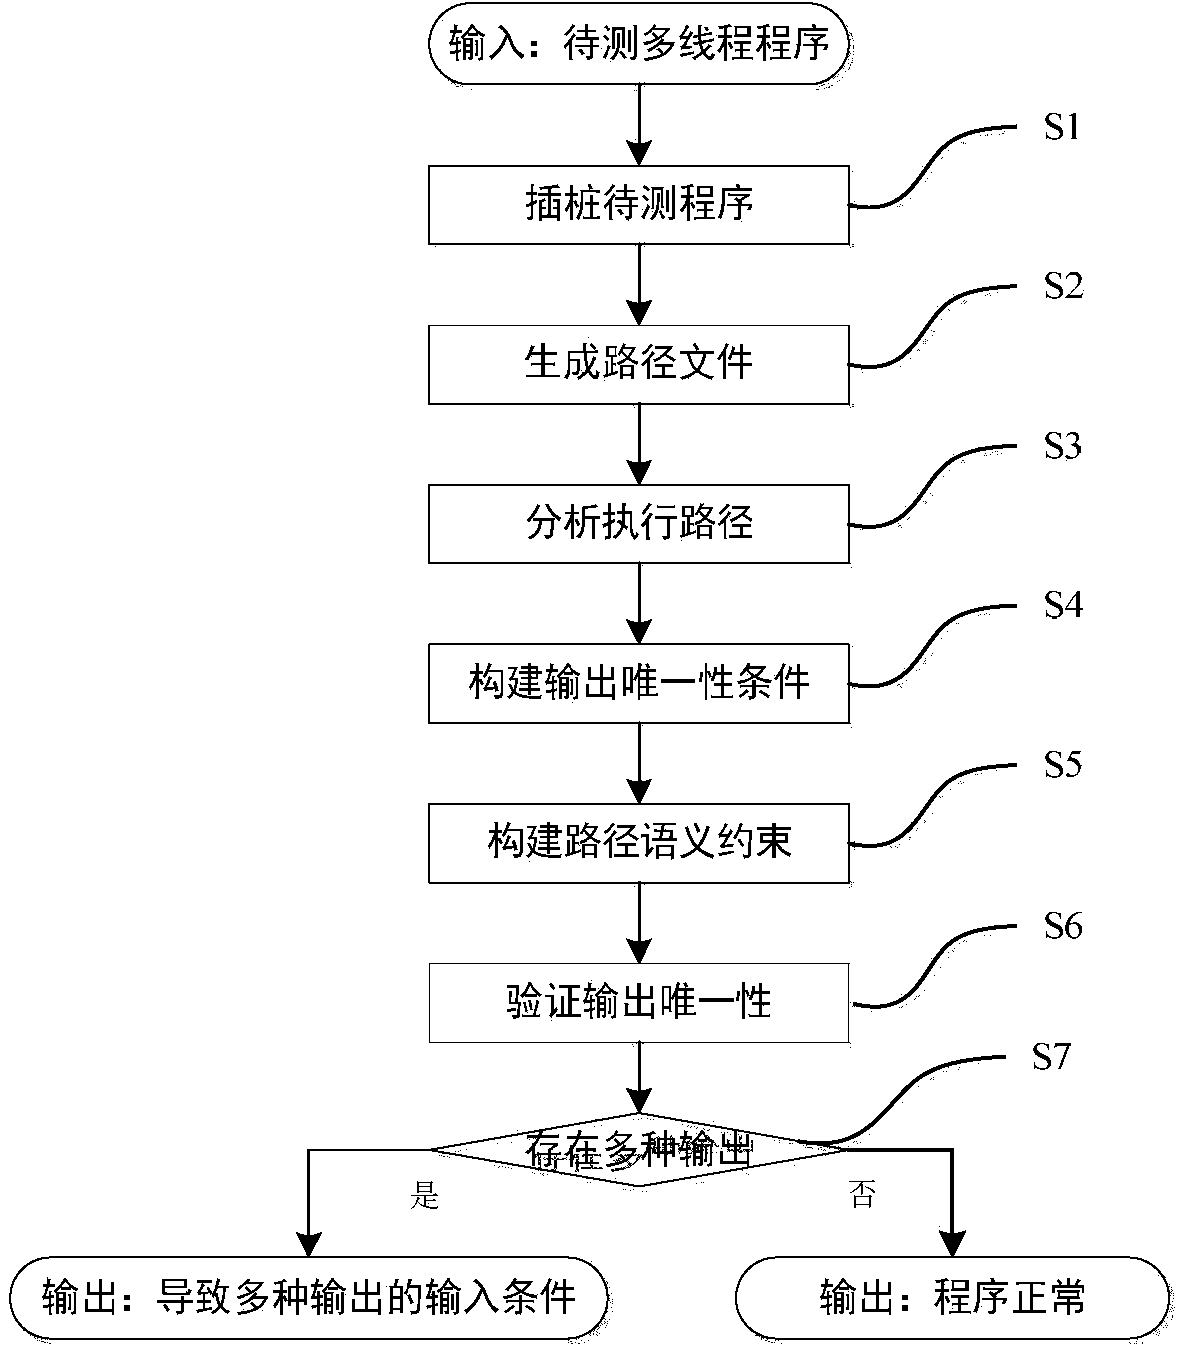 Multithreaded program output uniqueness detection and evidence generation method based on program constraint building